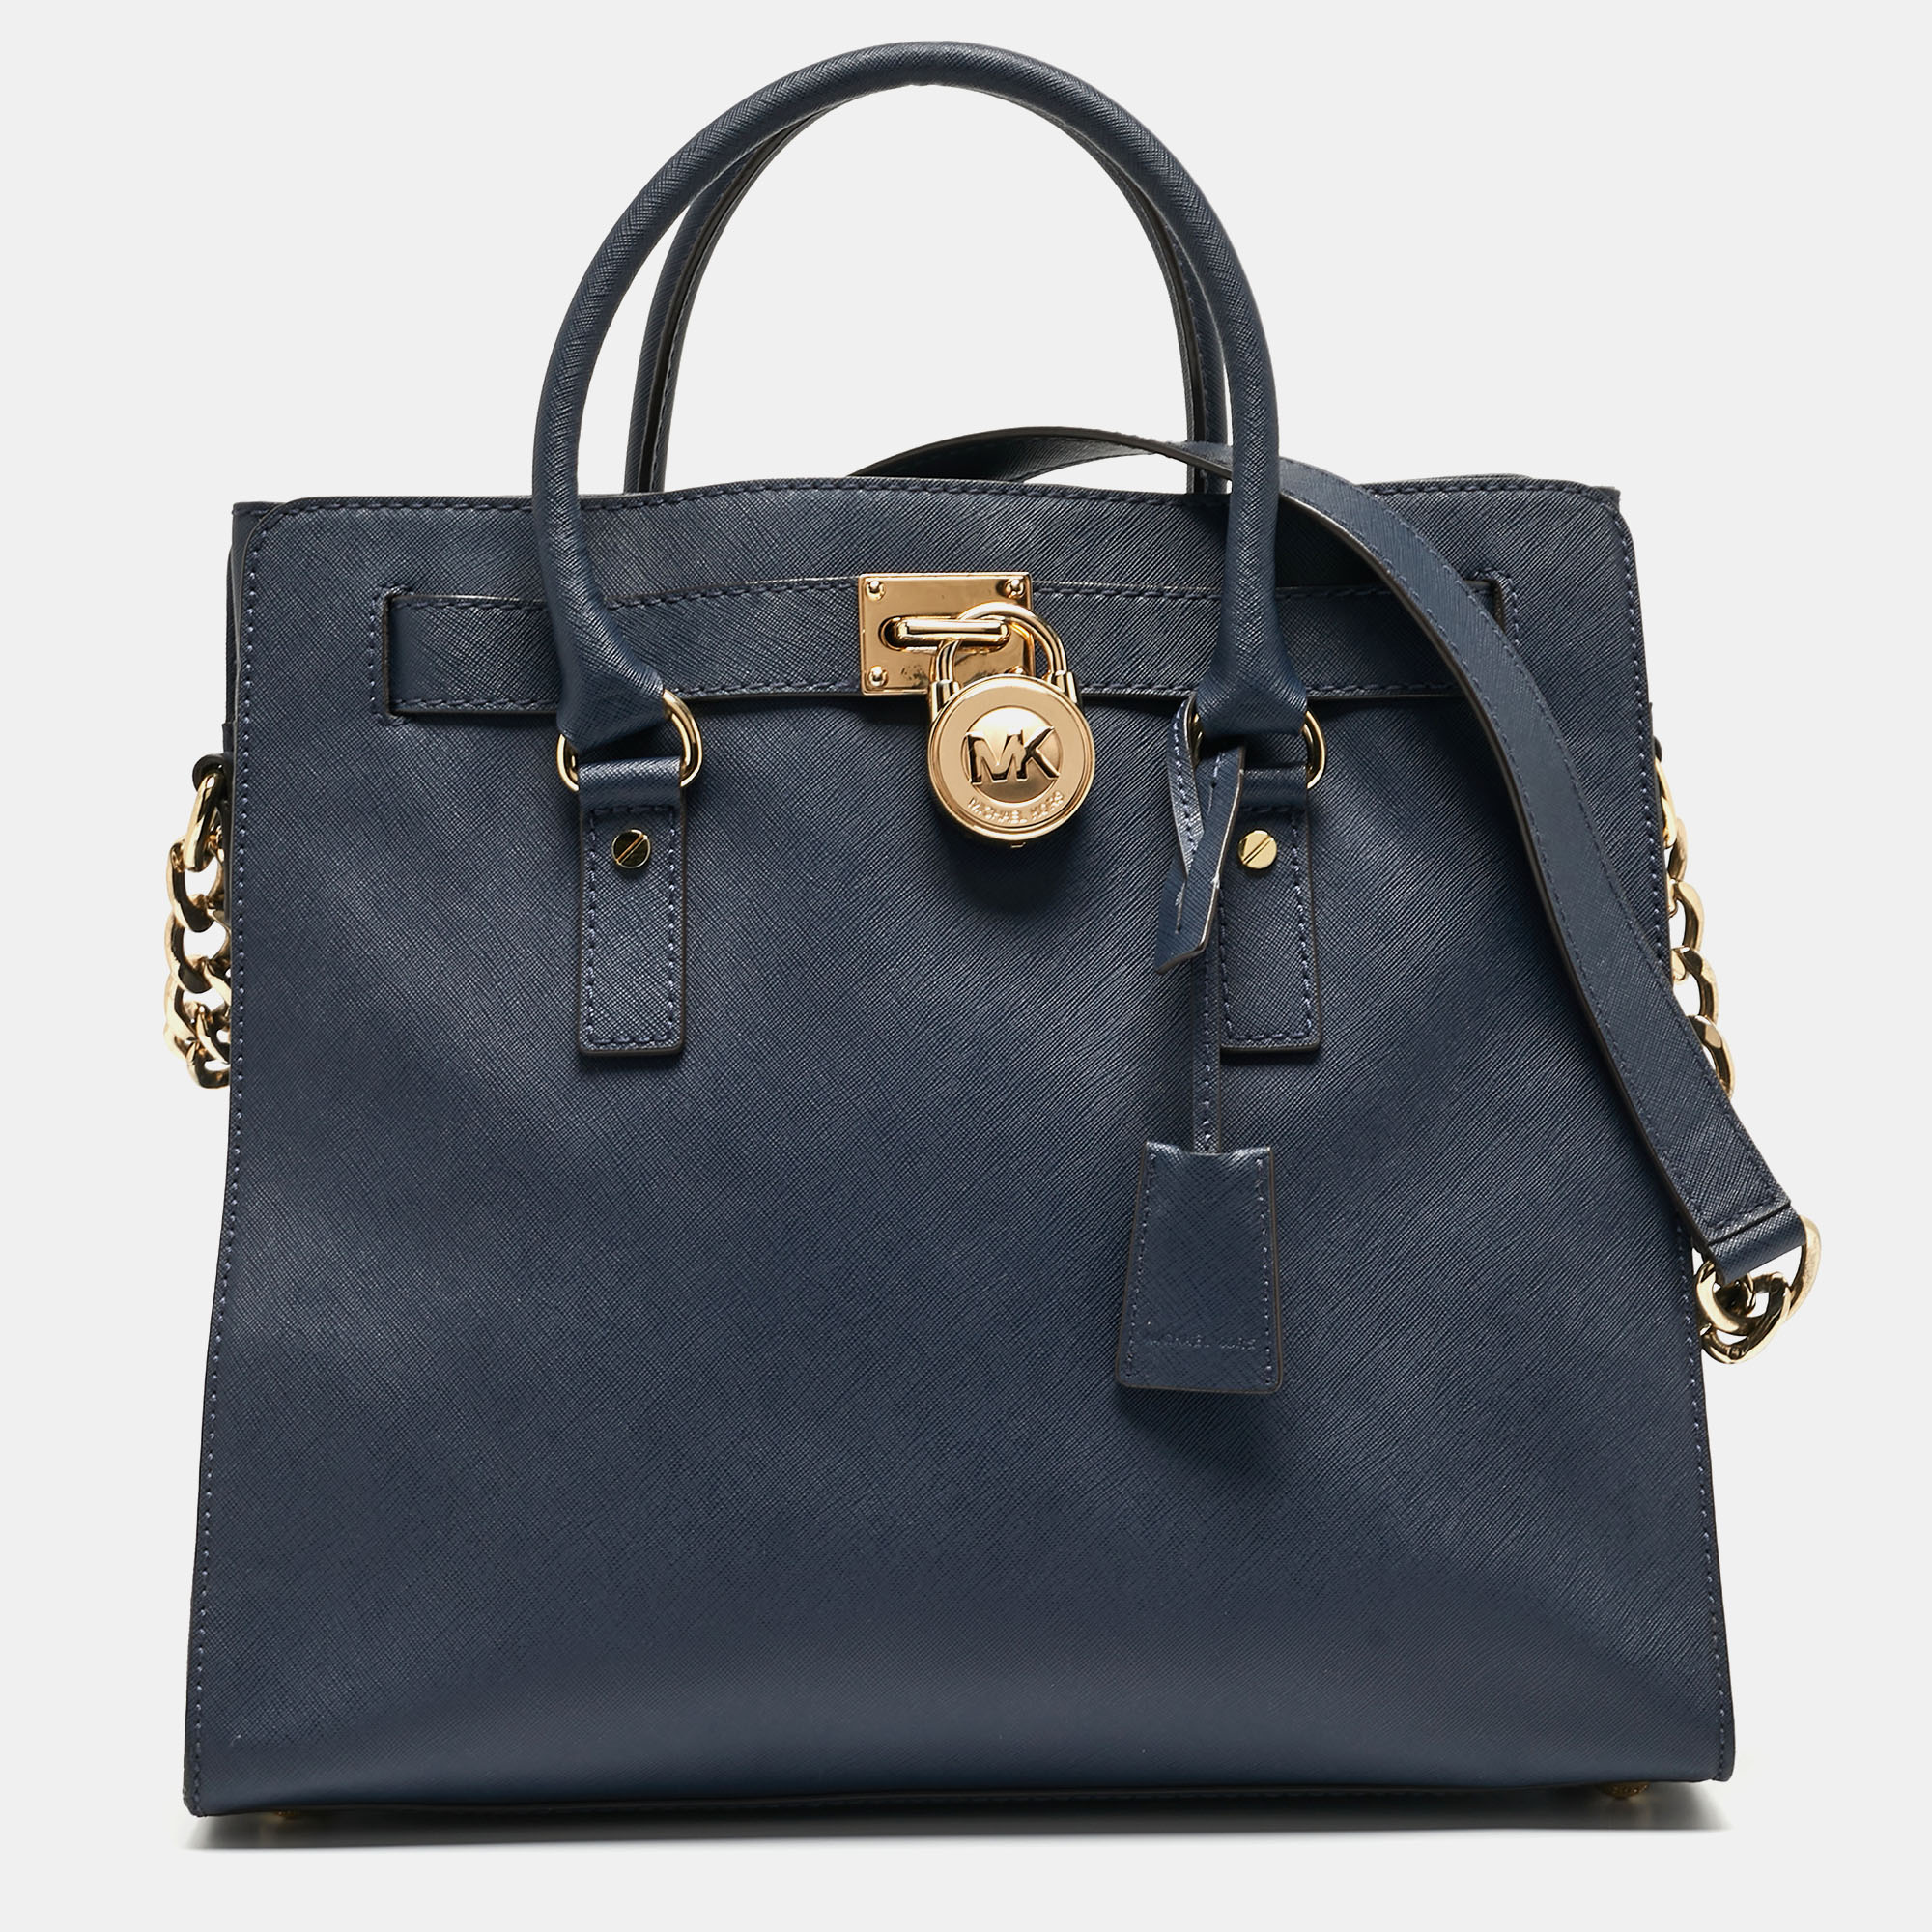 This MICHAEL Michael Kors tote promises to take you through the day with ease whether youre at work or out and about in the city. From its design to its structure the bag promises appeal and durability. It has two handles a shoulder strap and a spacious interior to hold all your essentials.